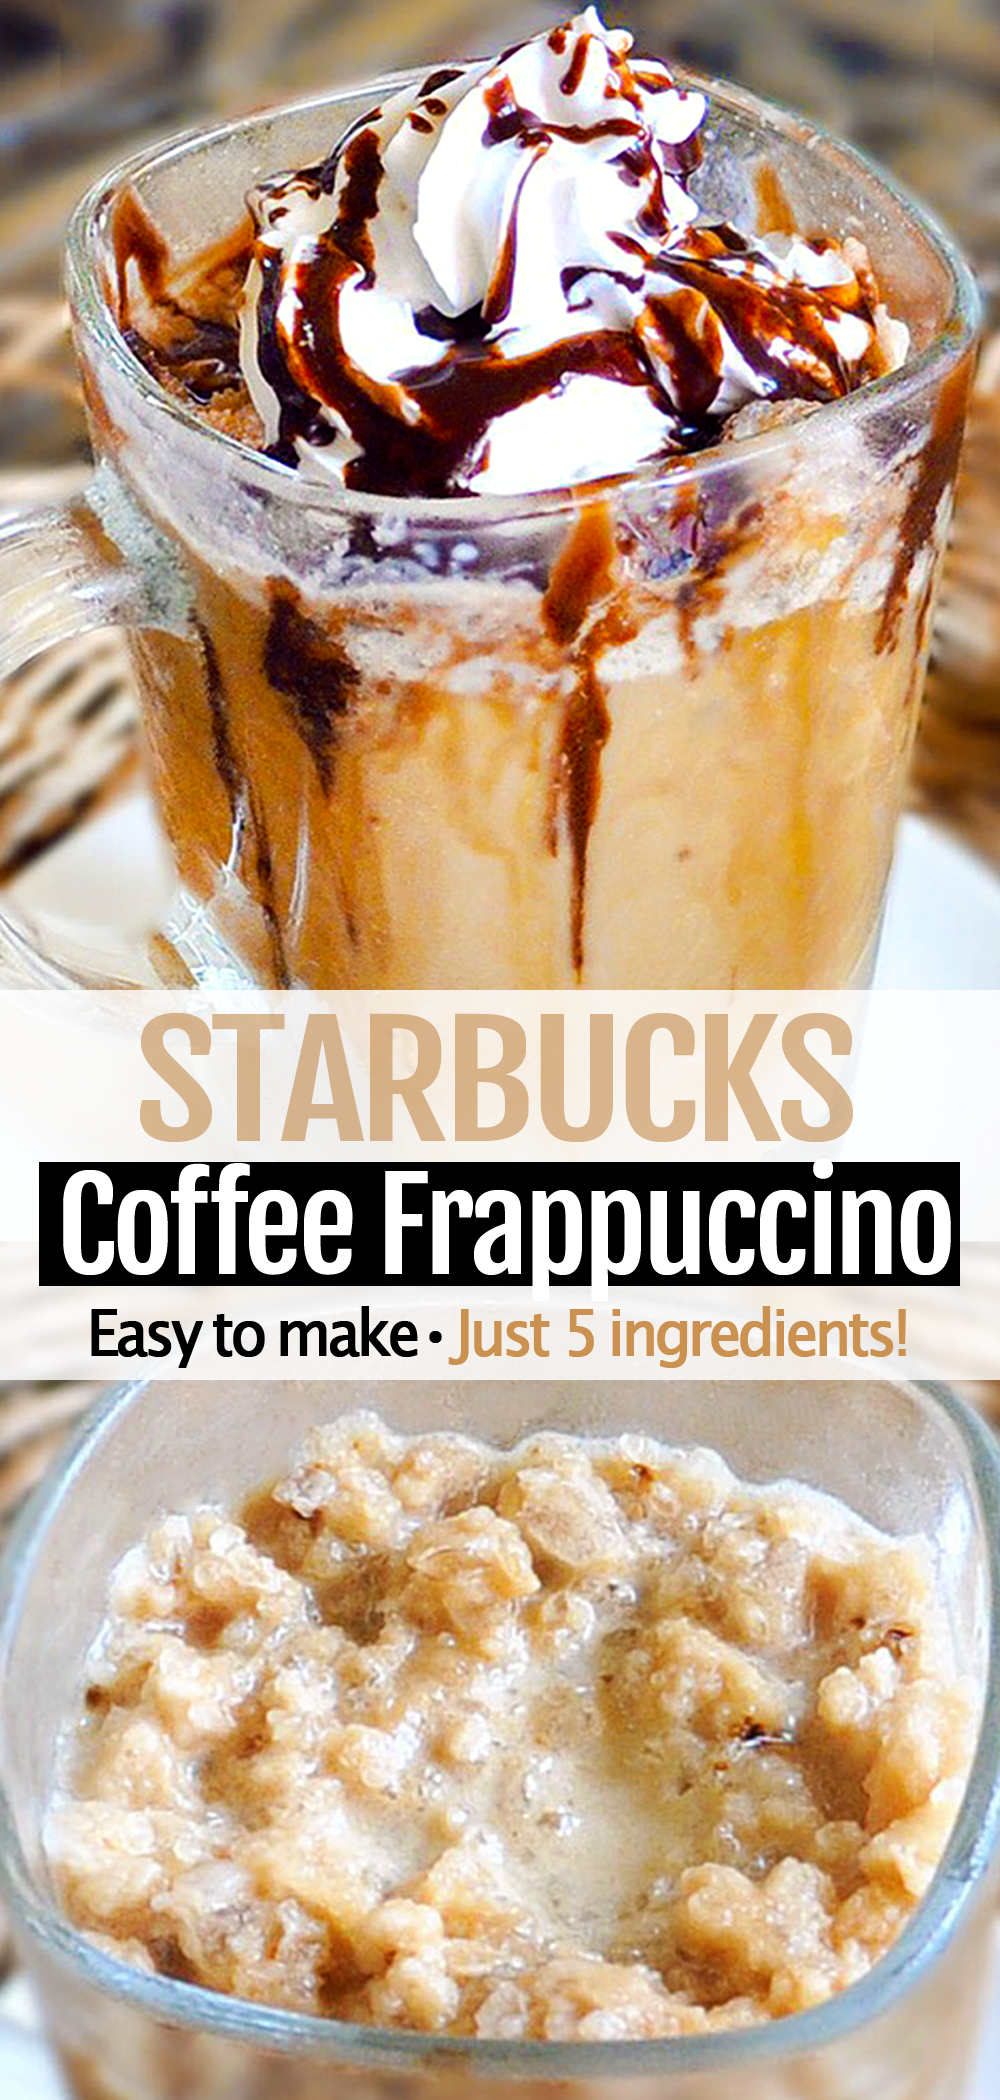 Mocha Frappuccino - Tried and Tasty